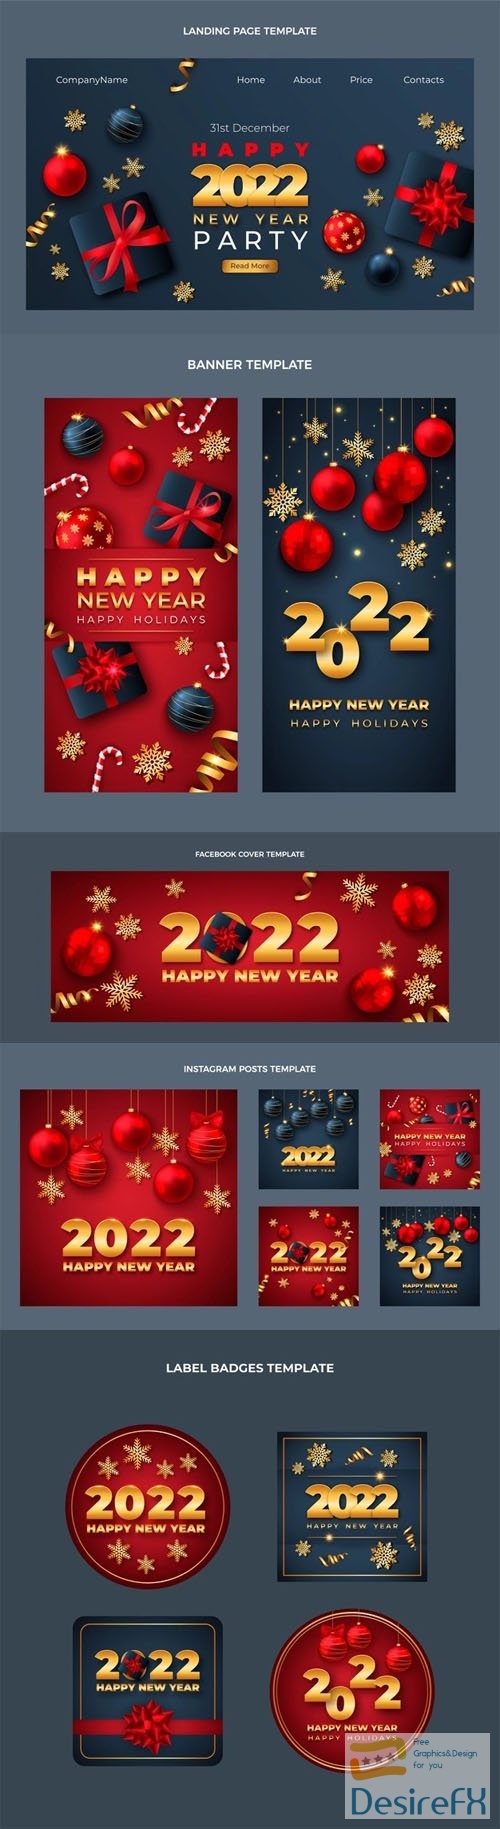 Realistic Happy New Year 2022 Vector Templates Collection